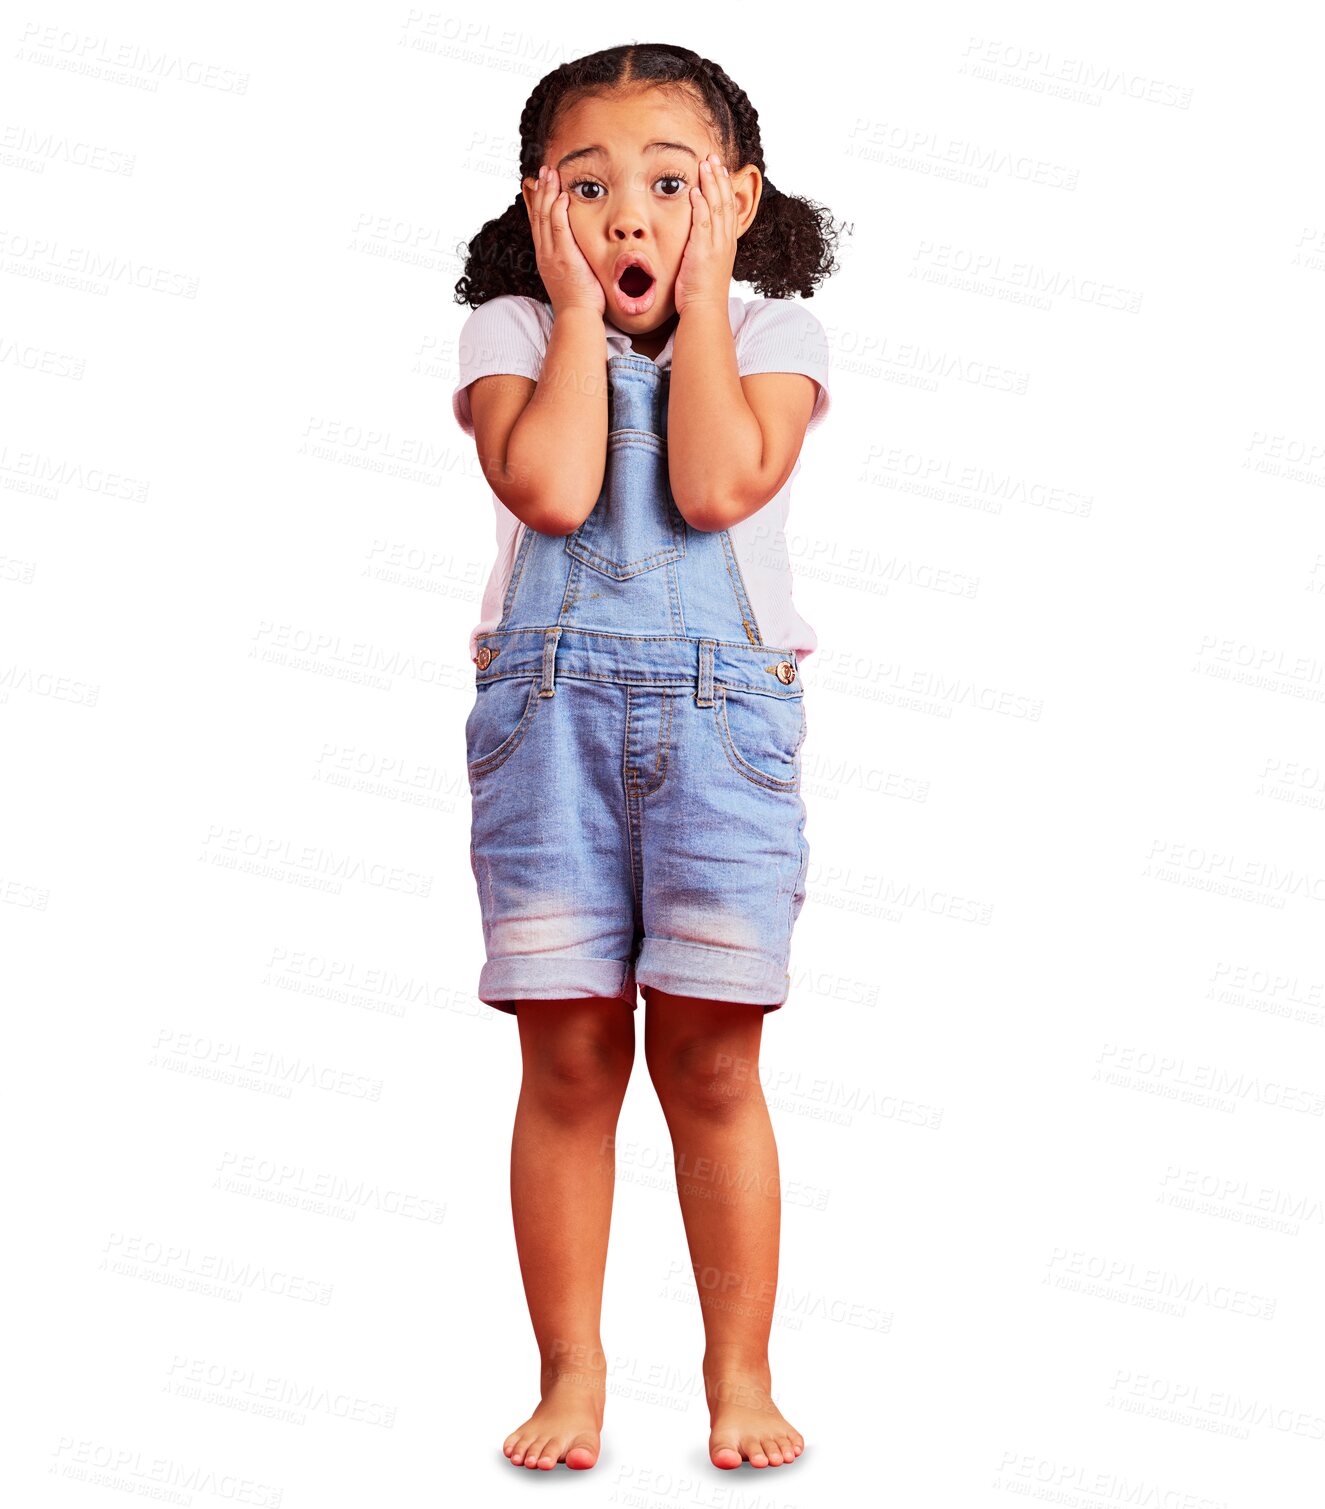 Buy stock photo Portrait, wow and surprise with a girl child isolated on a transparent background looking shocked at a news alert. Children, emoji and gossip with a young female kid looking amazed or in awe on PNG